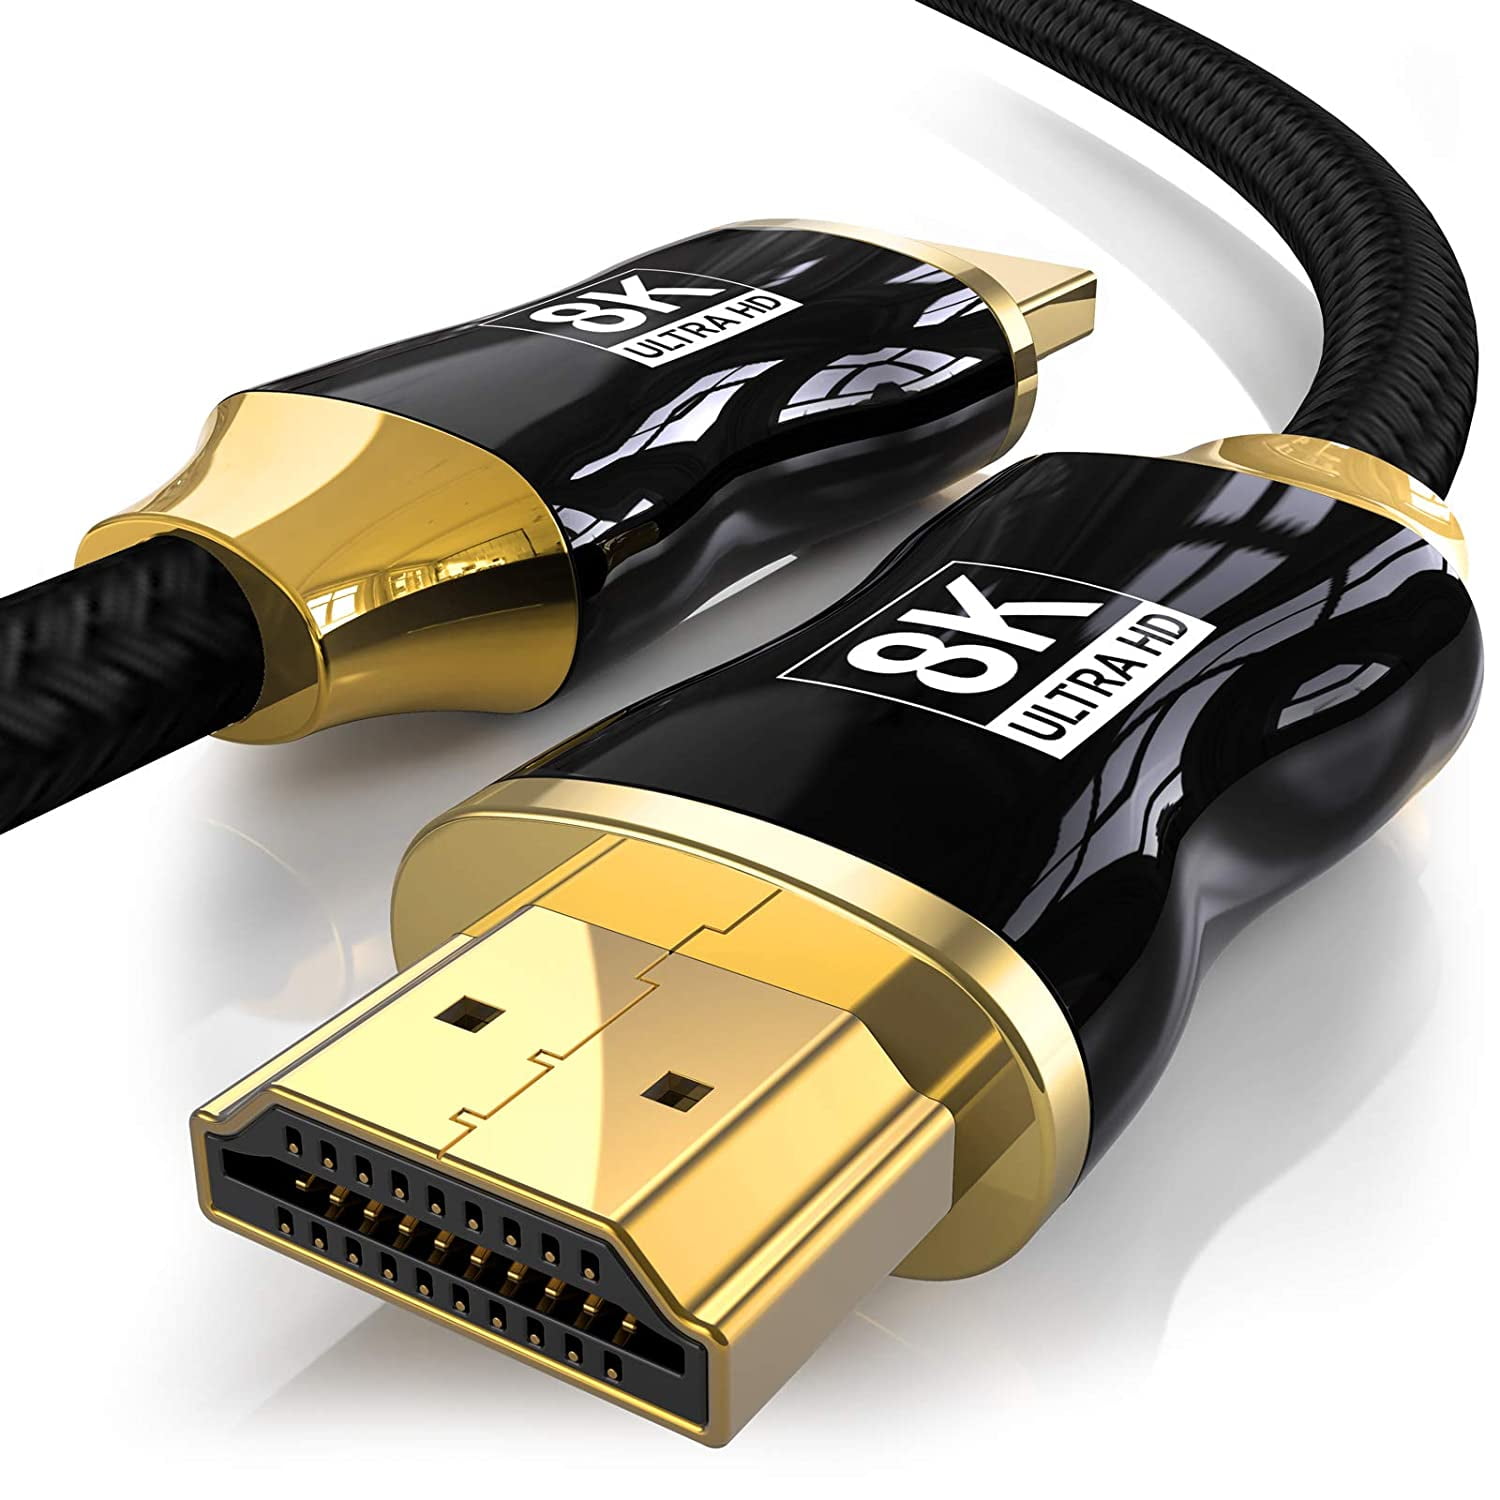 vejr Begå underslæb Beskæftiget 8K HDMI Cable 10 Ft,2.1 HDMI Cable 10 Feet Supports 48Gbps 8K@60Hz,4K@120Hz  HDR,3D,Dolby Vision,Dolby Atmos Compatible with All TVs, BluRay, Xbox,  PS4(Zinc Alloy housing) - Walmart.com